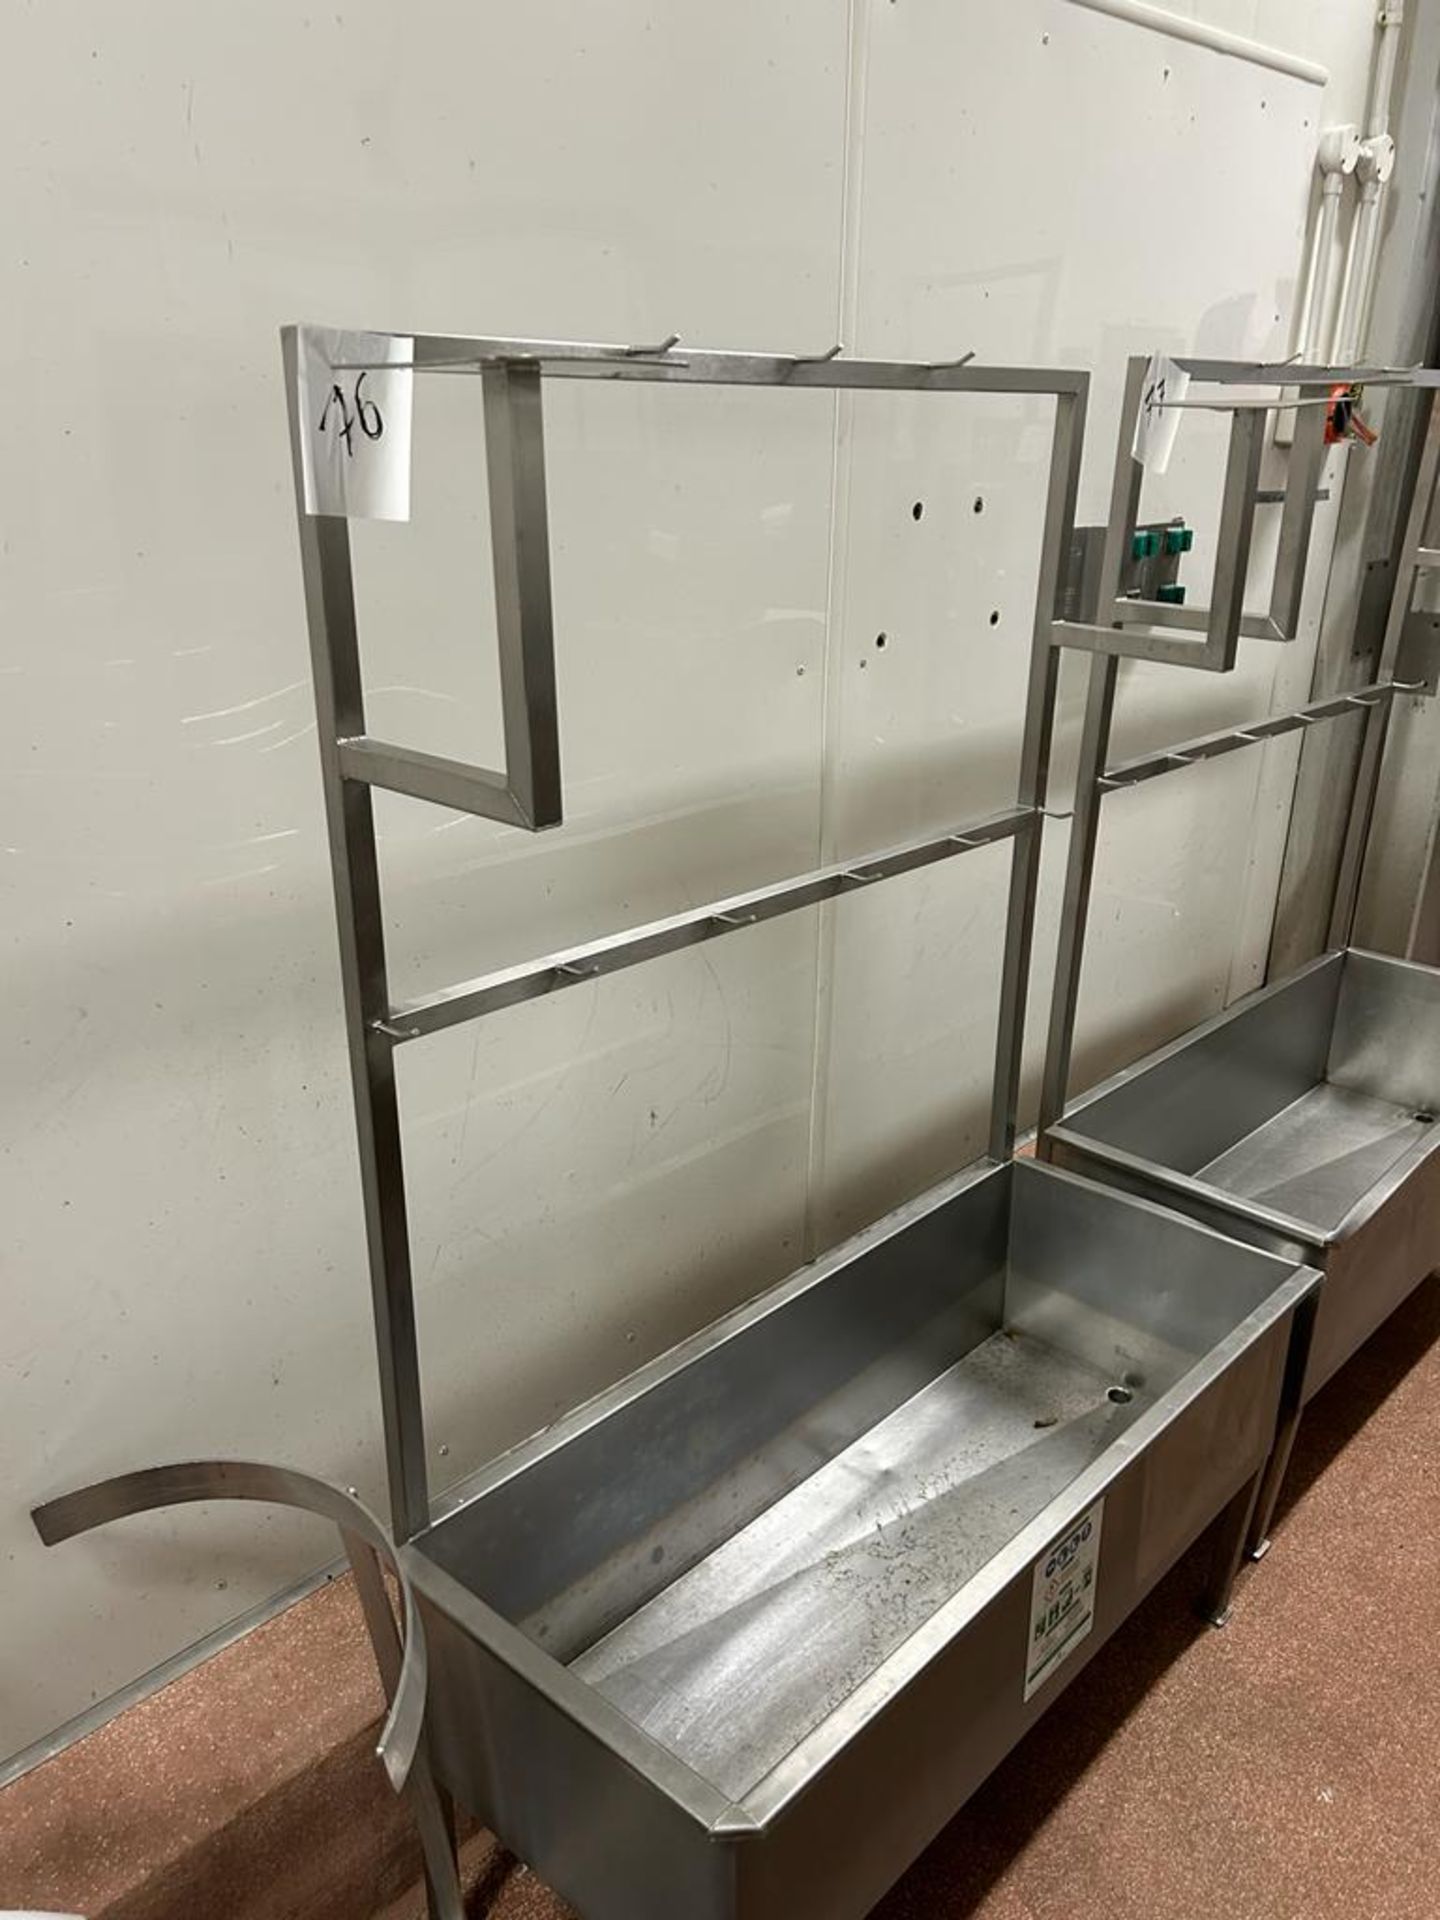 PPE WASH STAND WITH HANGING RAIL